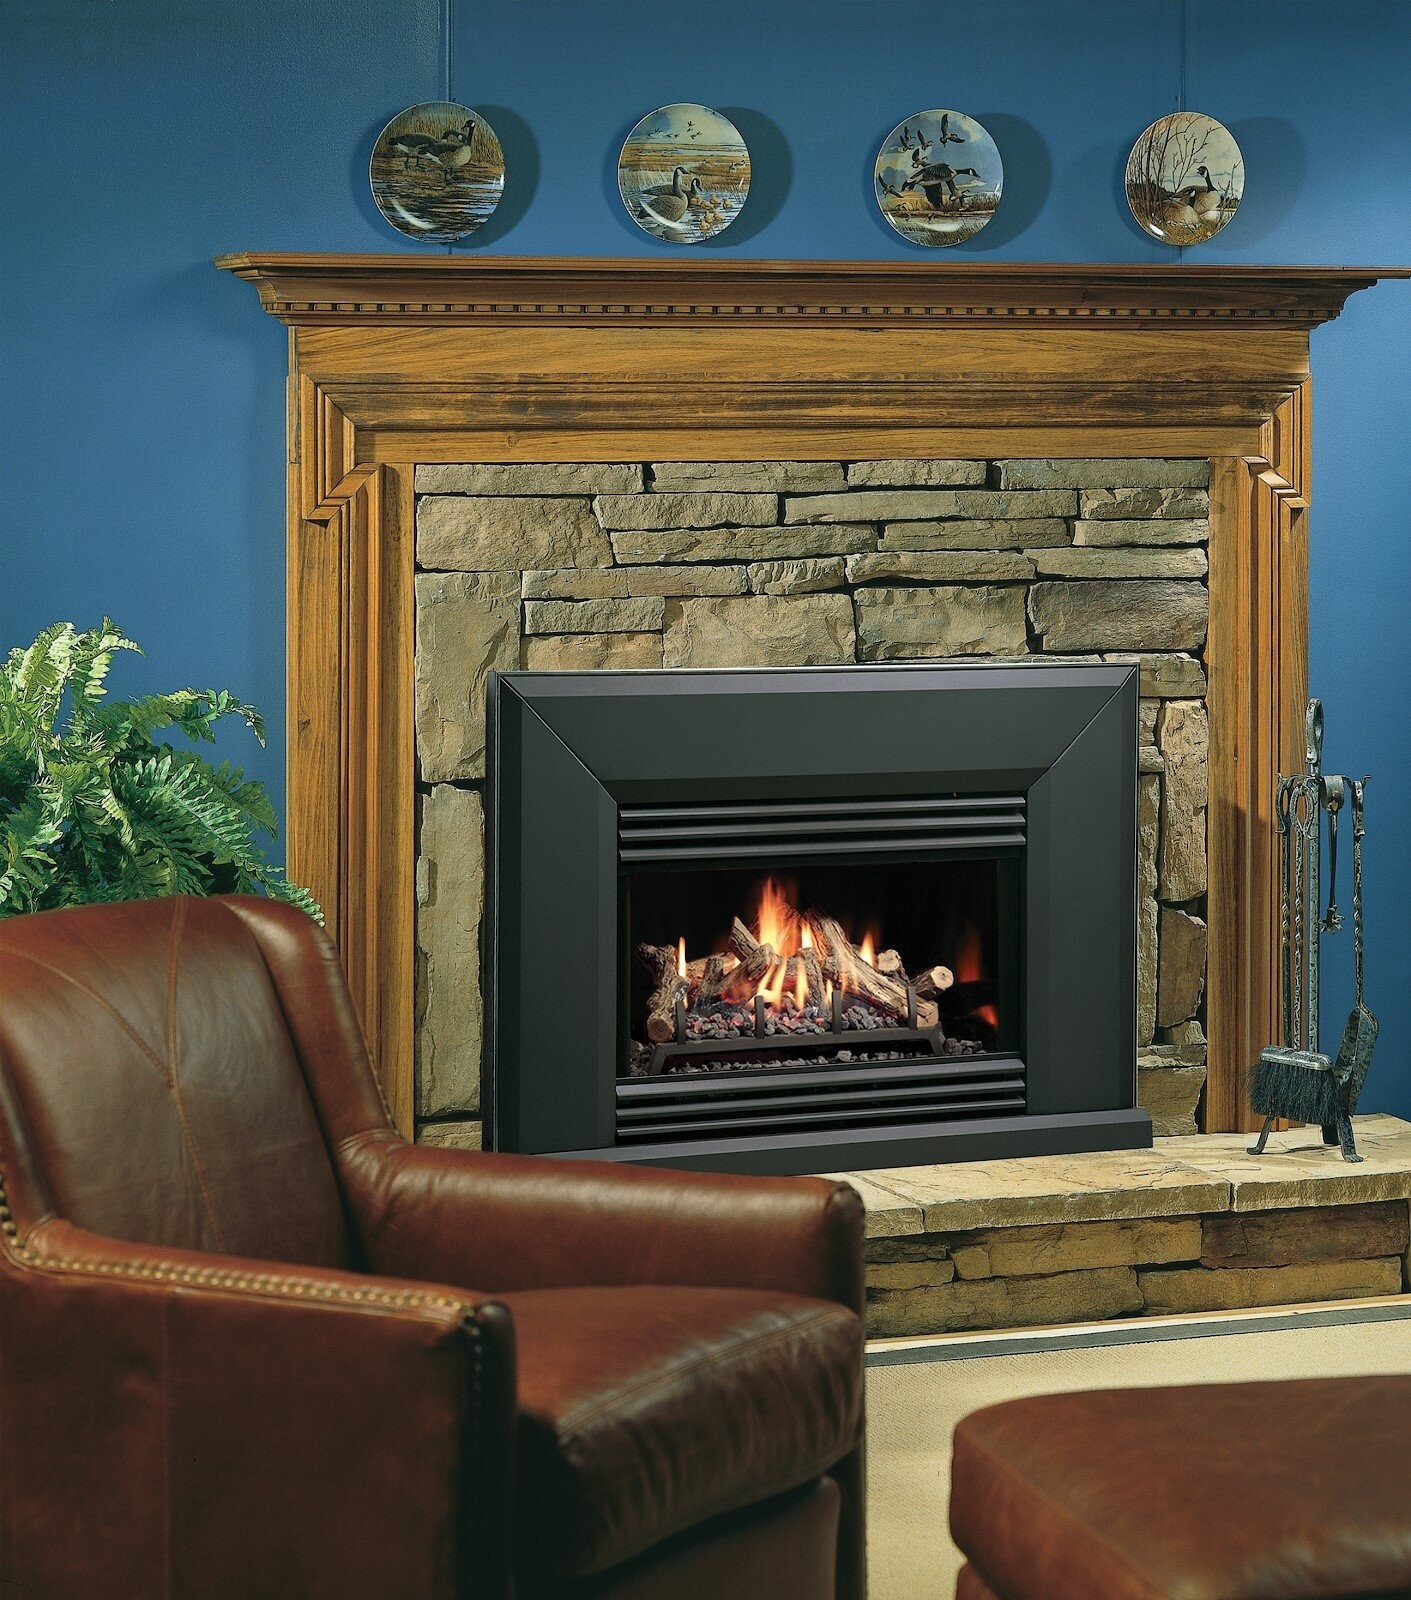 What You Need to Know About Pellet Fireplaces